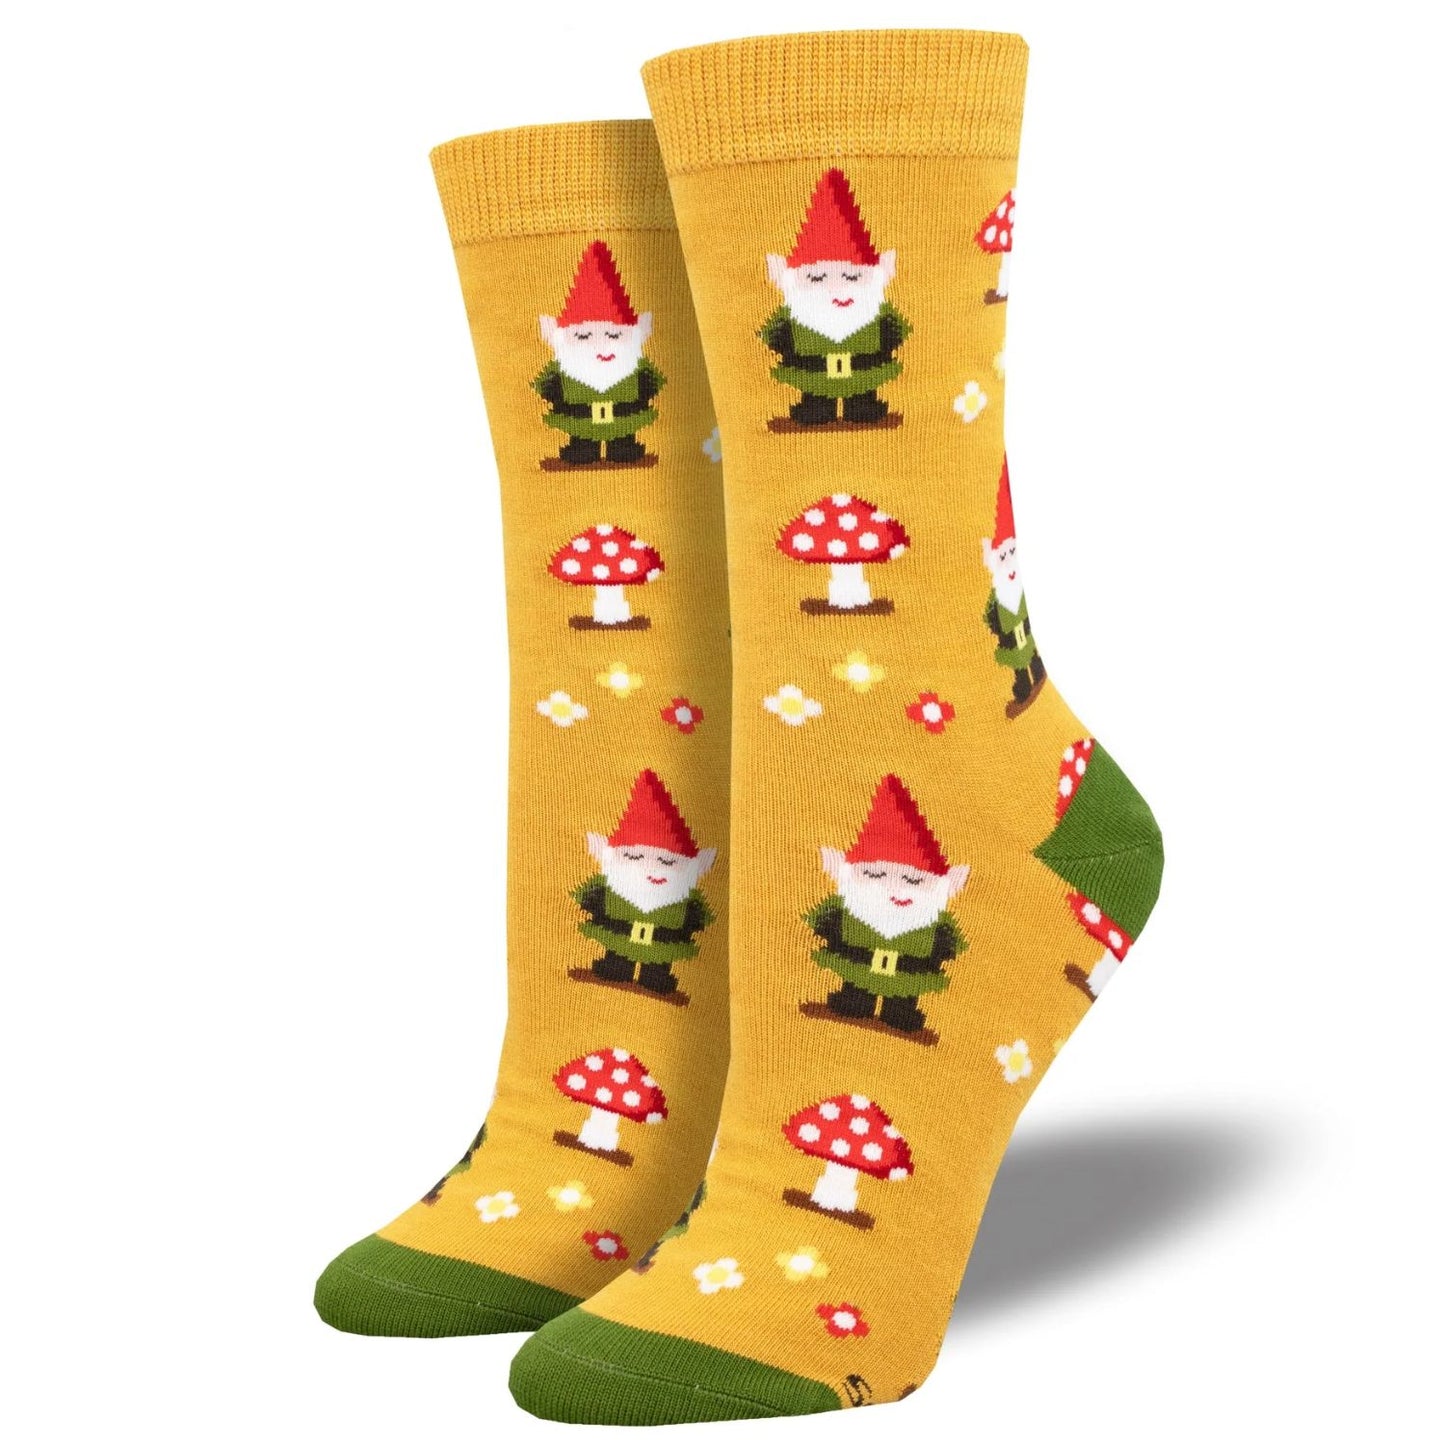 Gnome more mushrooms socks a pair of gold yellow socks with gnome and mushroom print